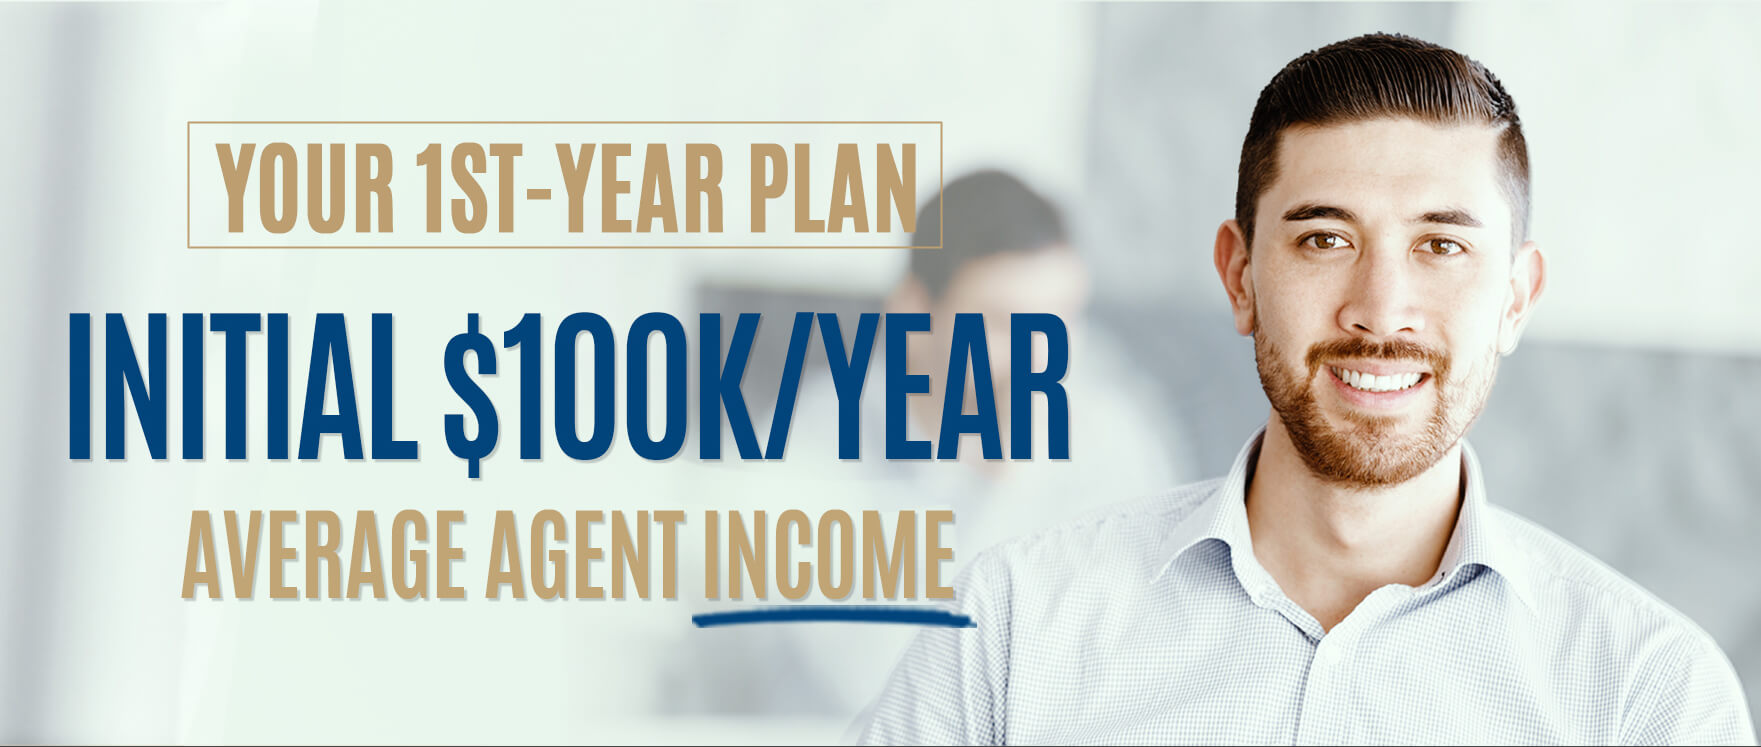 Your 1st- Year Plan: Initial $100K/Year Average Agent Income